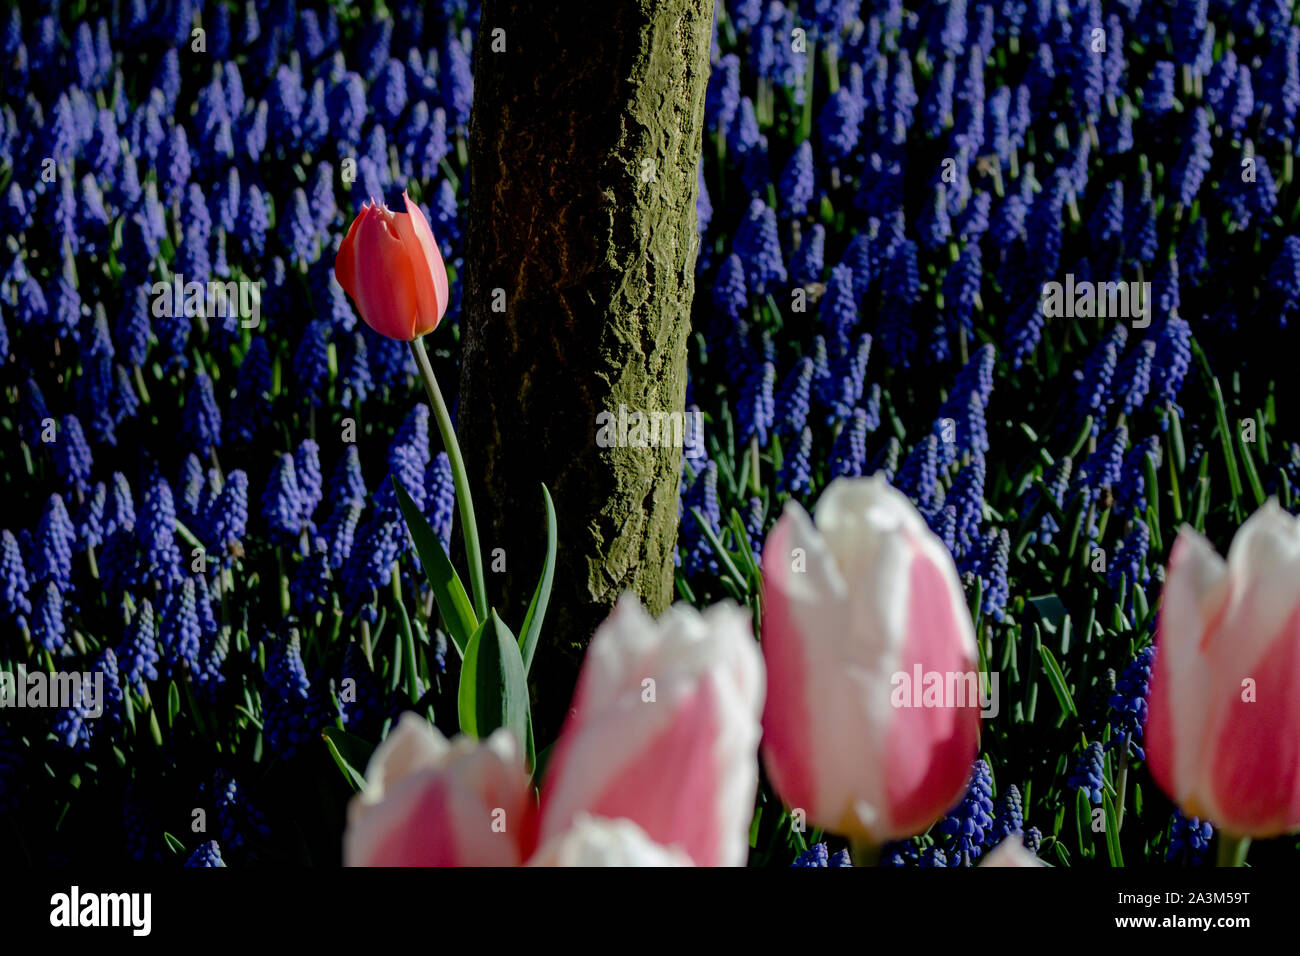 Tulips with Hyacinths and trees Stock Photo